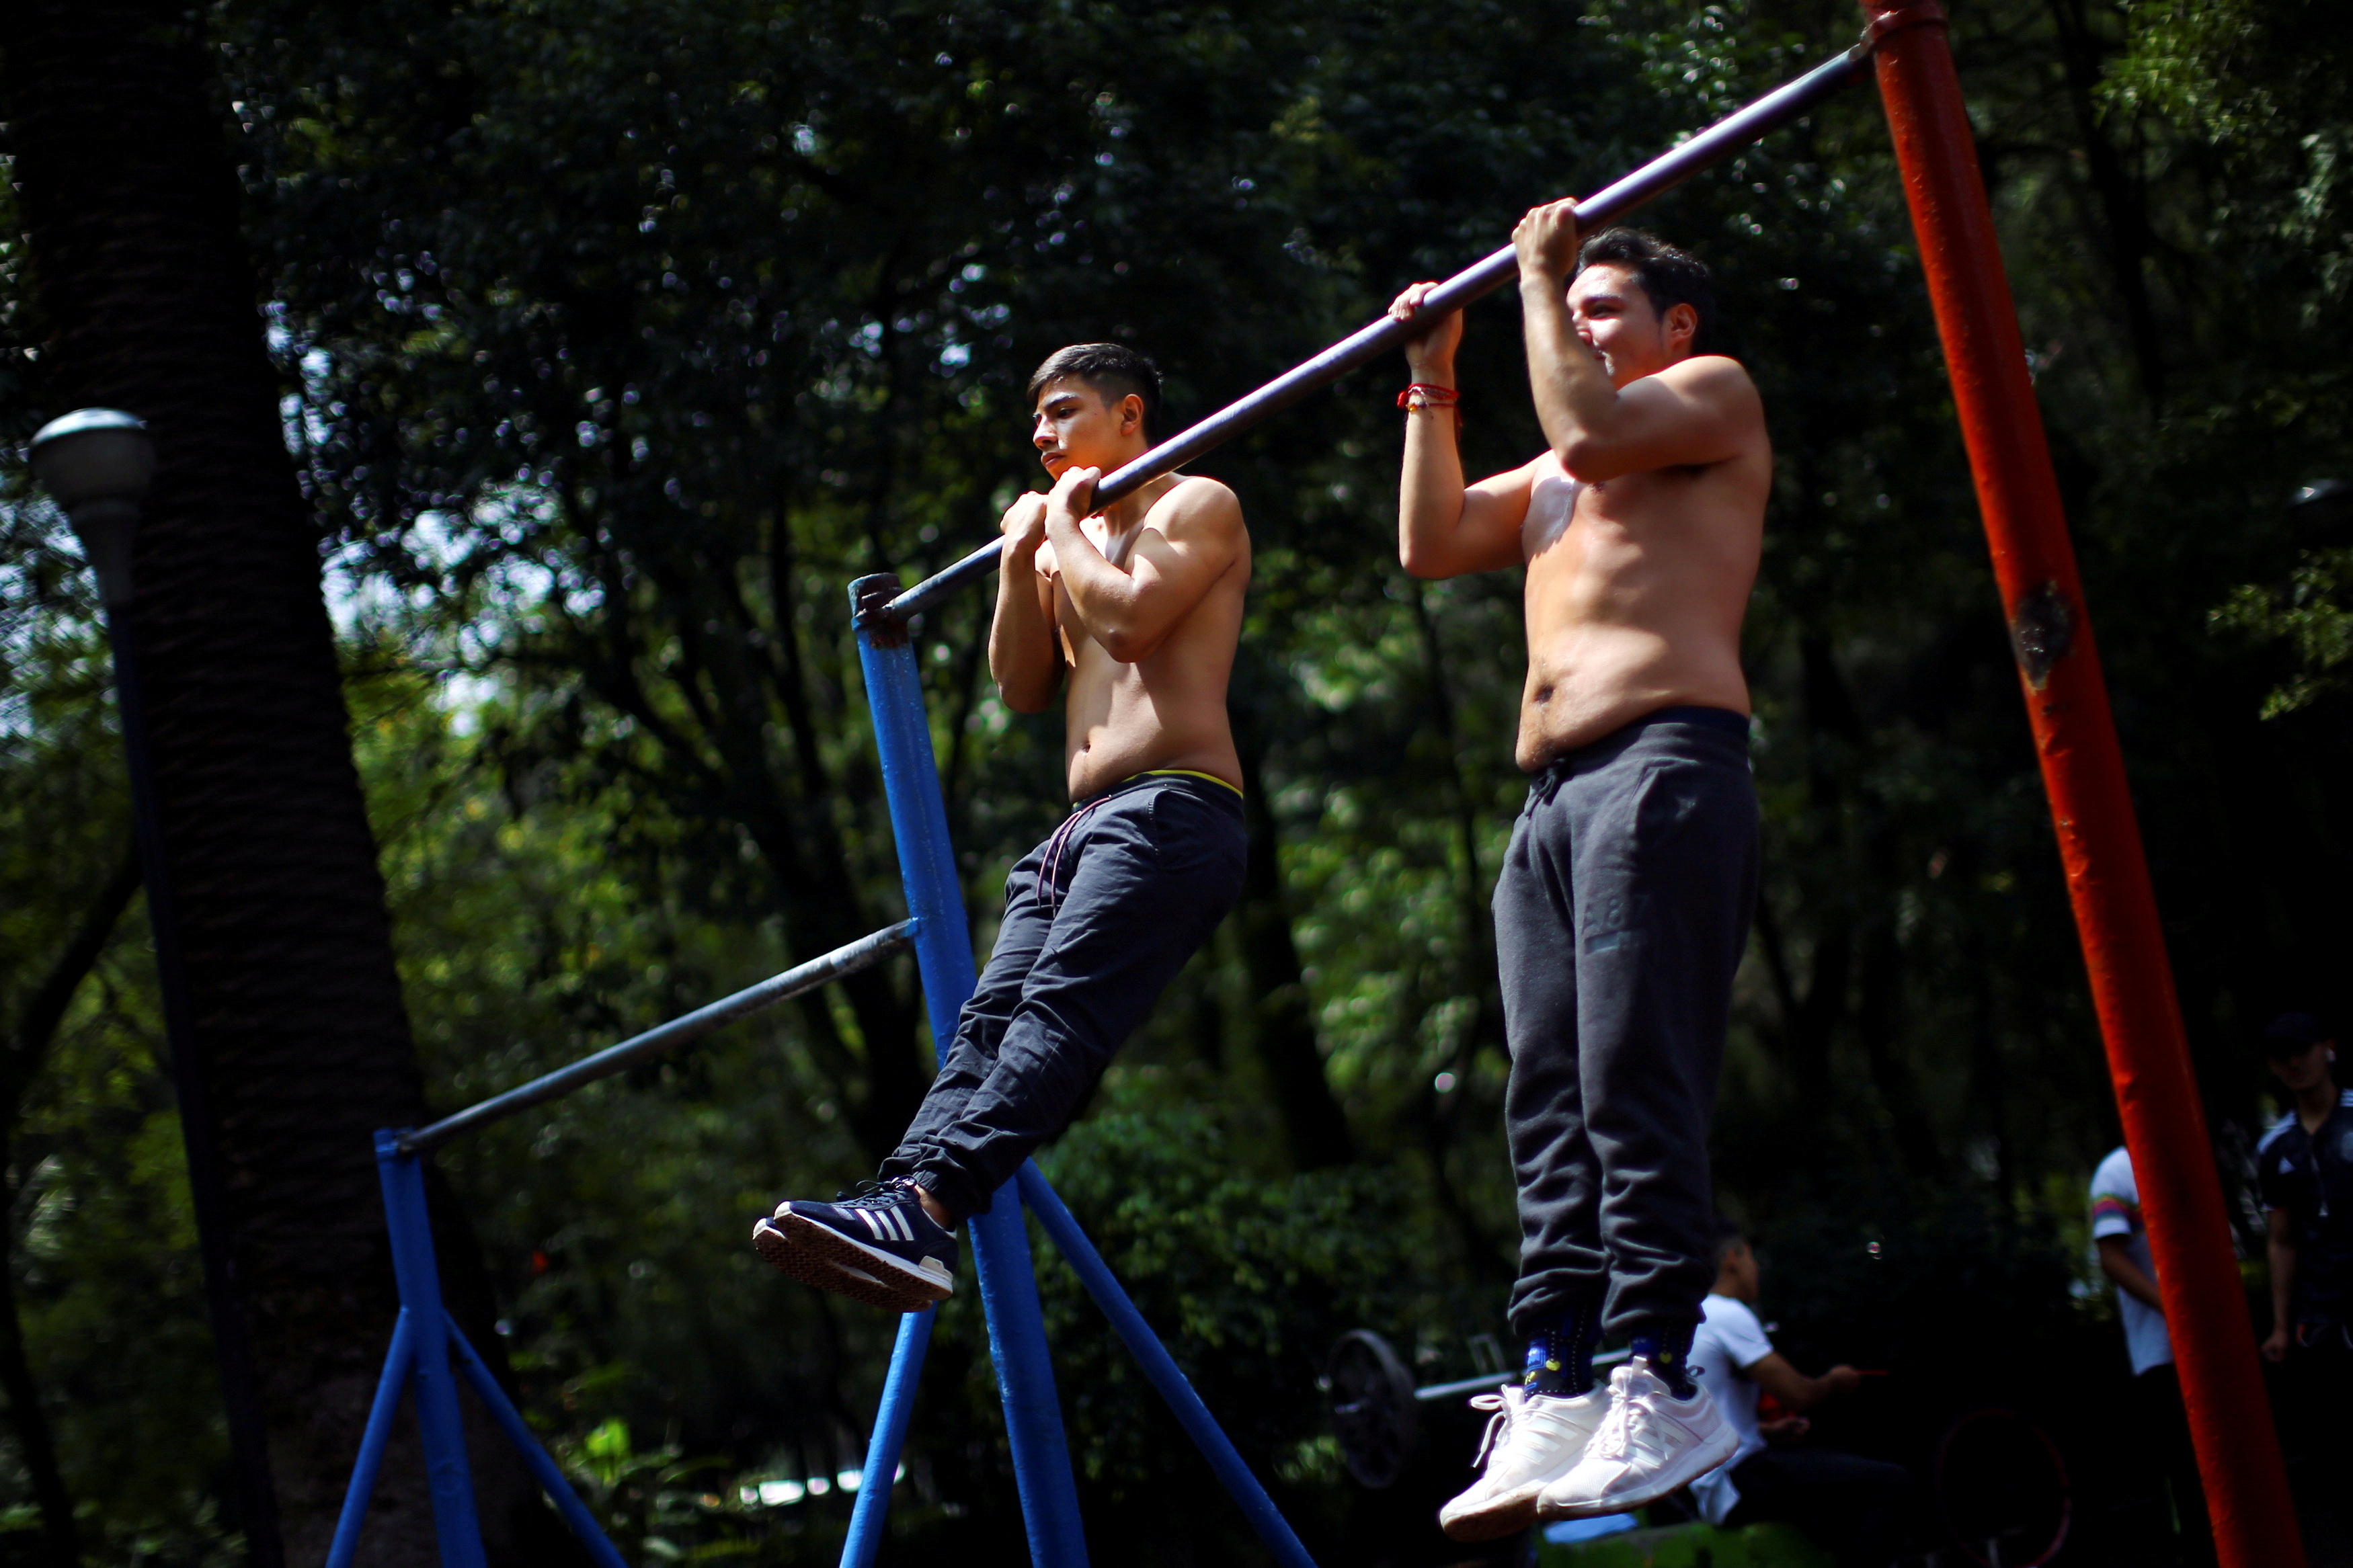 Men exercise in a public park in Mexico City